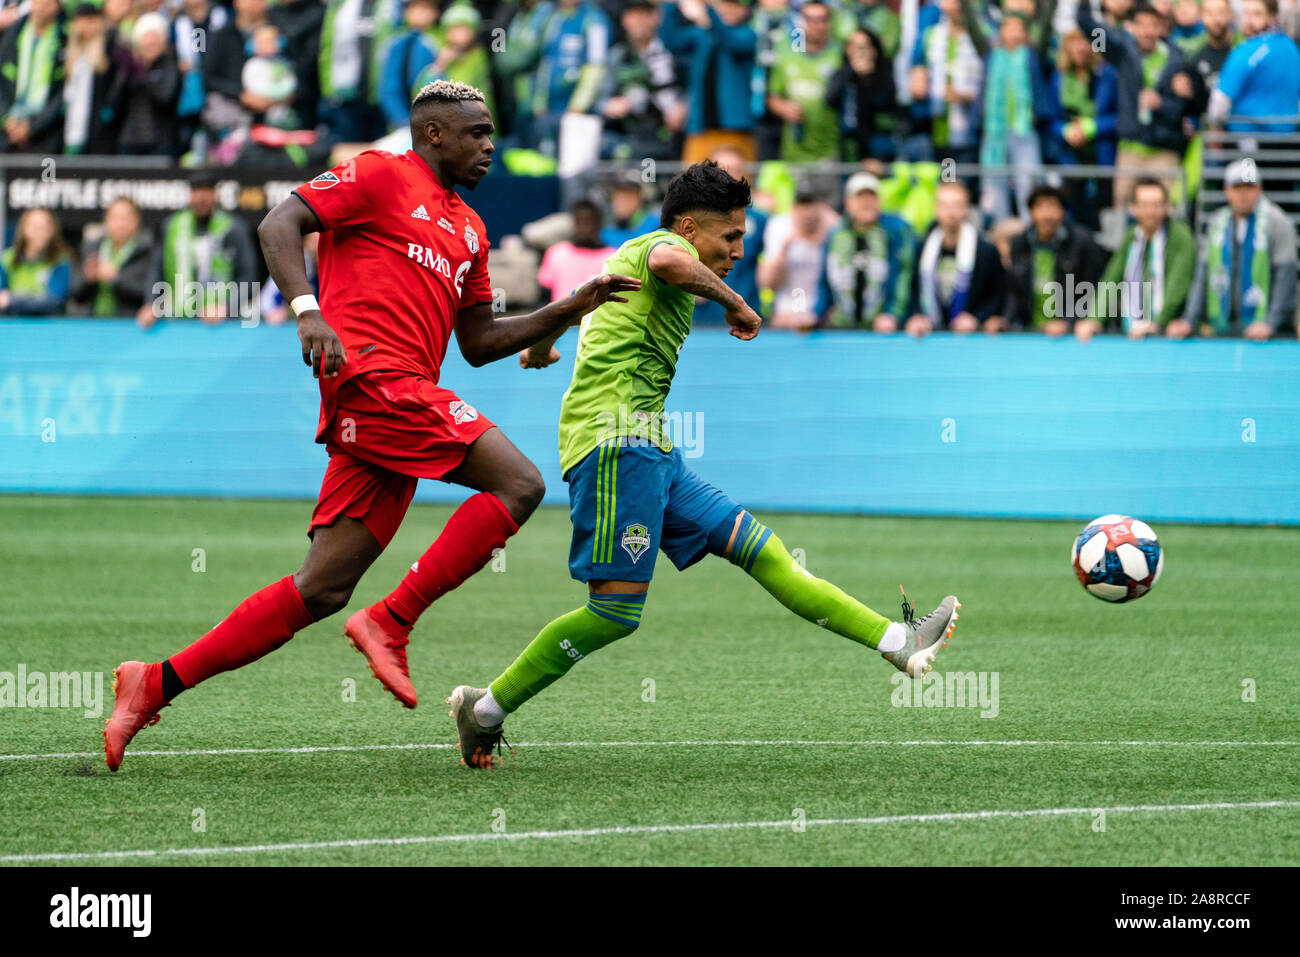 Seattle, USA. 10th Nov, 2019. Raul Ruidiaz (9) shoots and scores Seattle's third goal of the game in 90th minute as the Sounders cruised past Toronto to win the MLS Cup. Credit: Ben Nichols/Alamy Live News Stock Photo